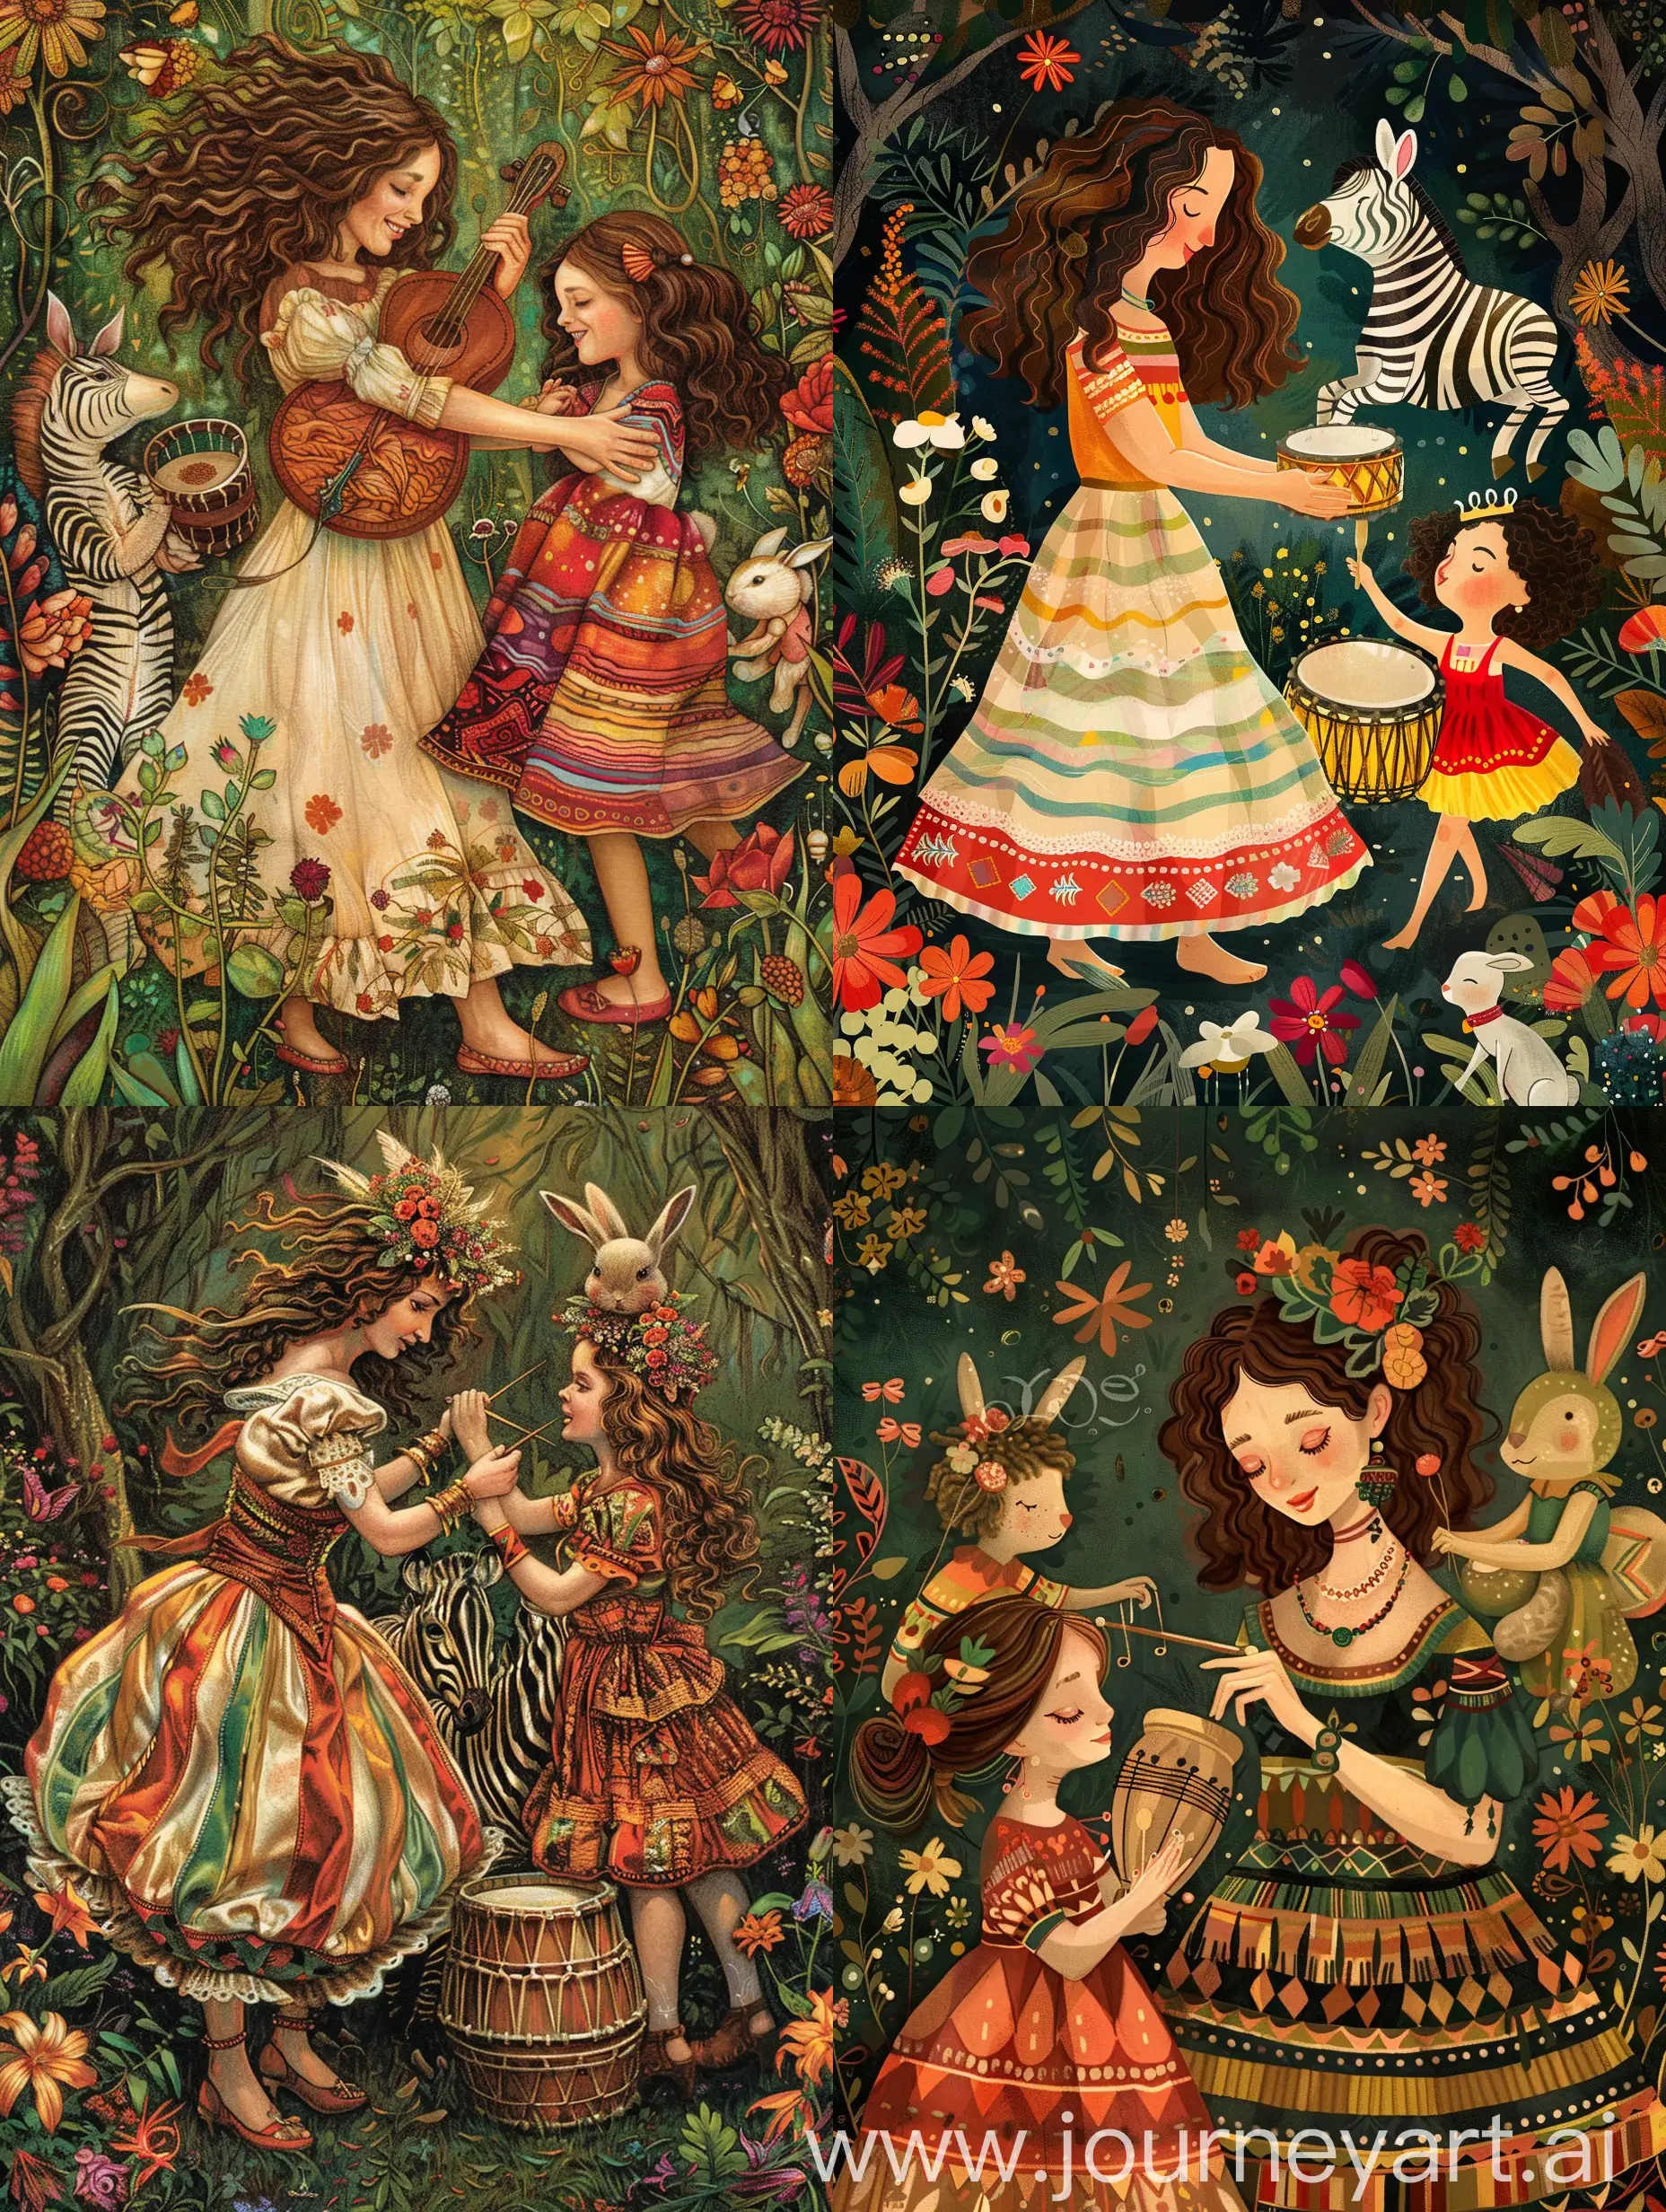 Curly-BrownHaired-Woman-and-Daughter-Dancing-with-Zebra-Drumini-and-Bunny-Characters-in-Childrens-Book-Style